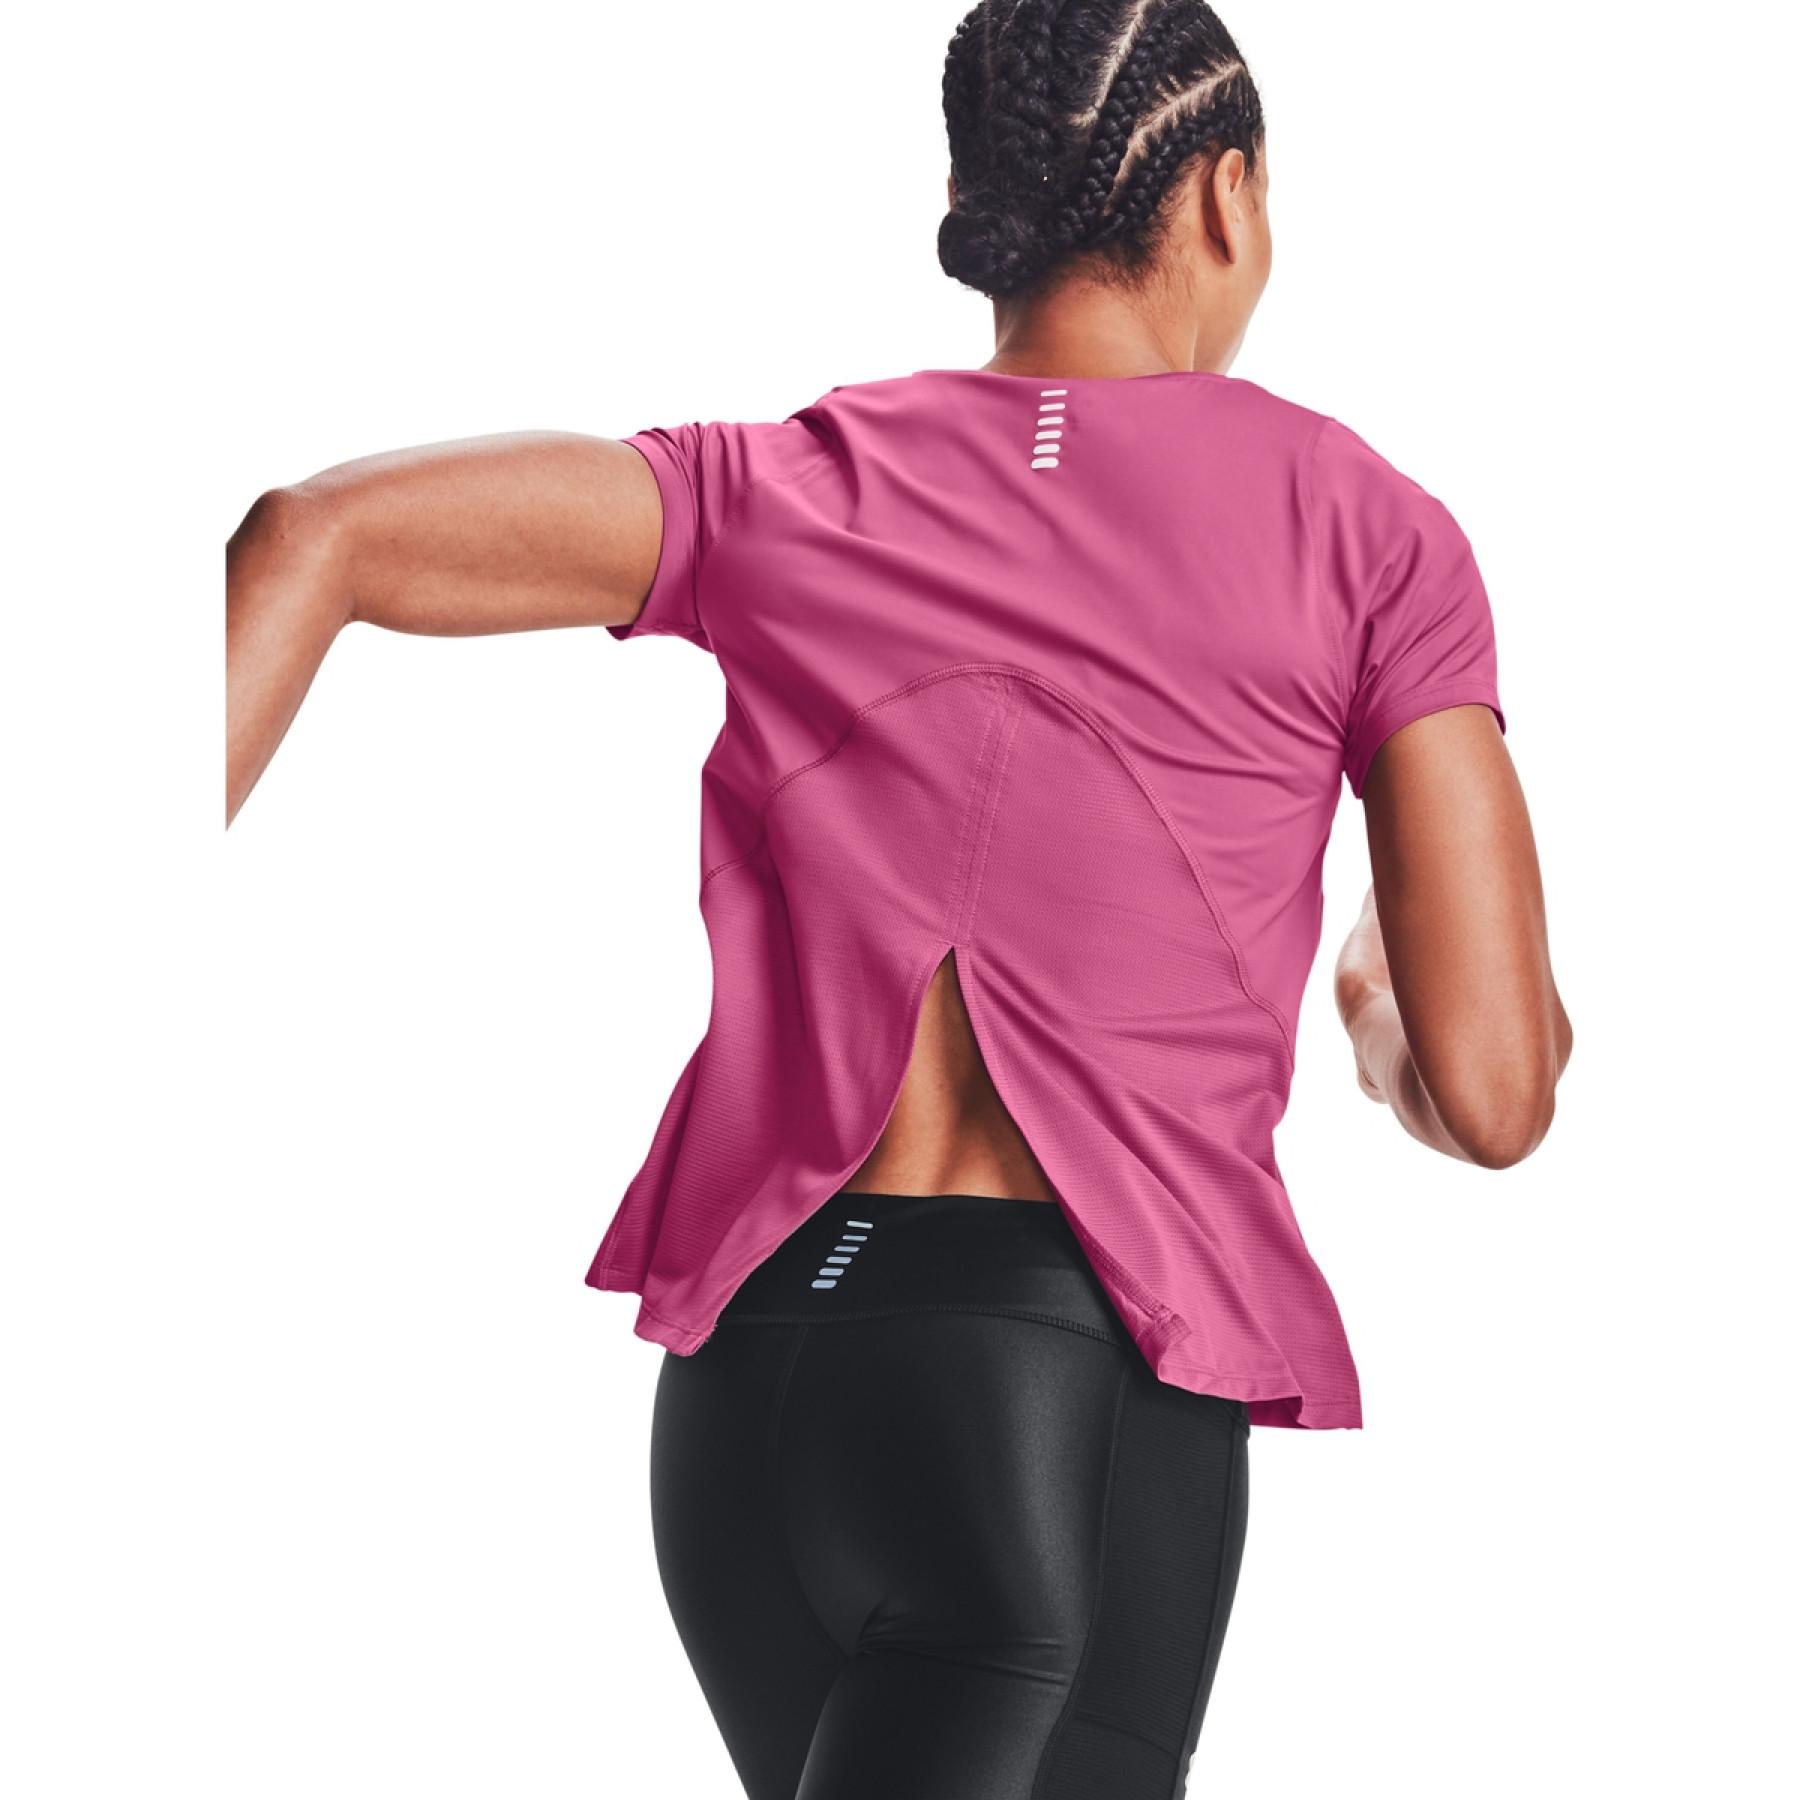 Women's jersey Under Armour à manches courtes iso-chill Run